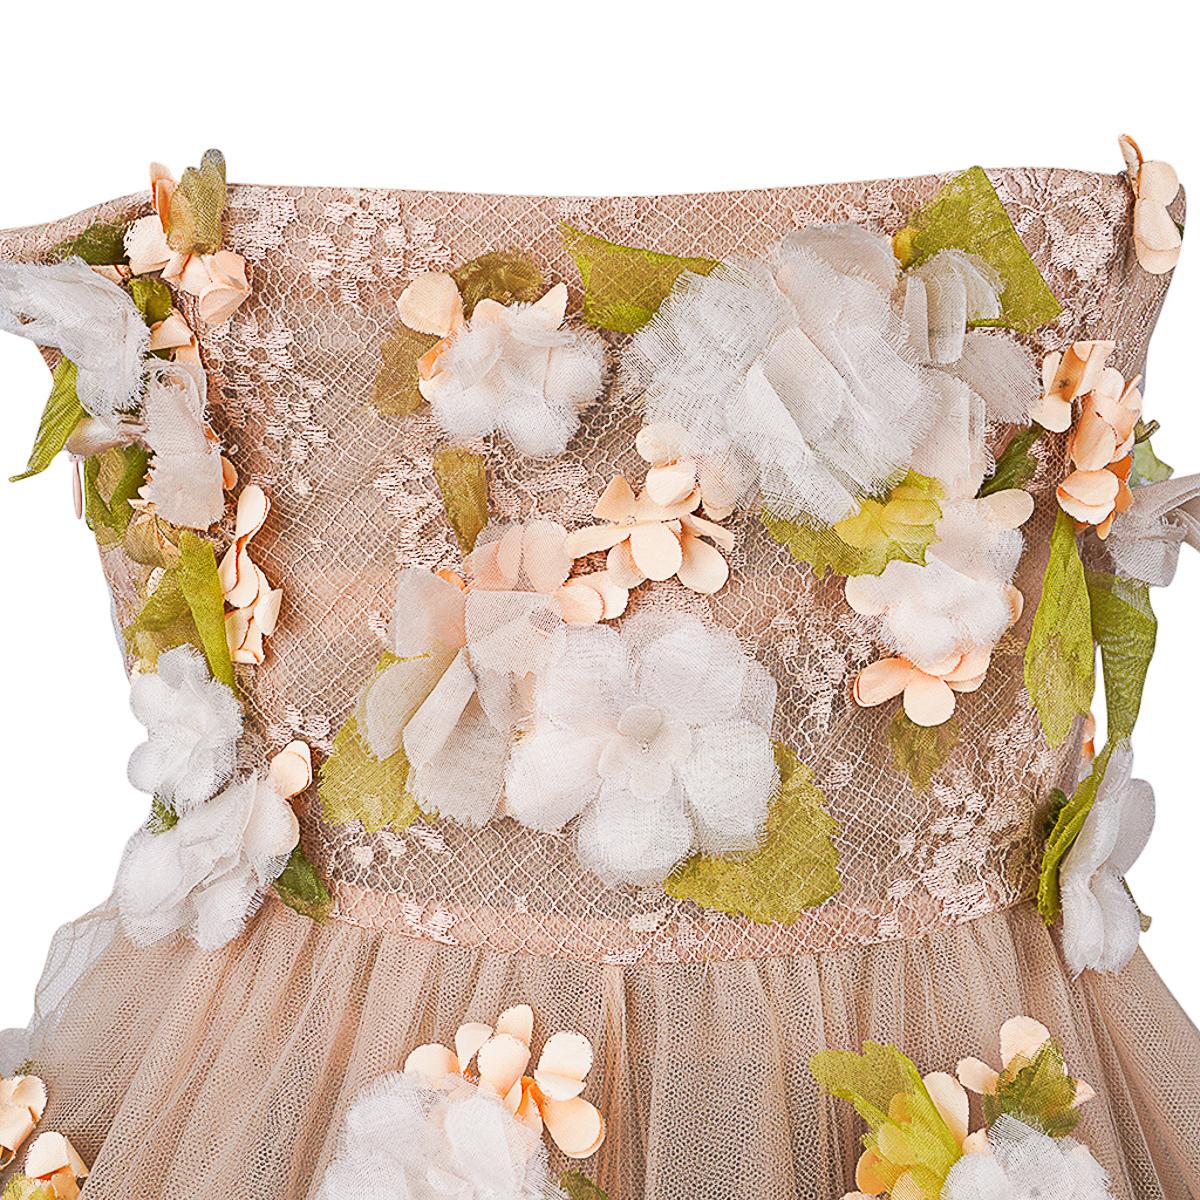 Valentino Strapless Empire Nude Flower Adorned Gown 1 of 2 Size 0 For Sale 4